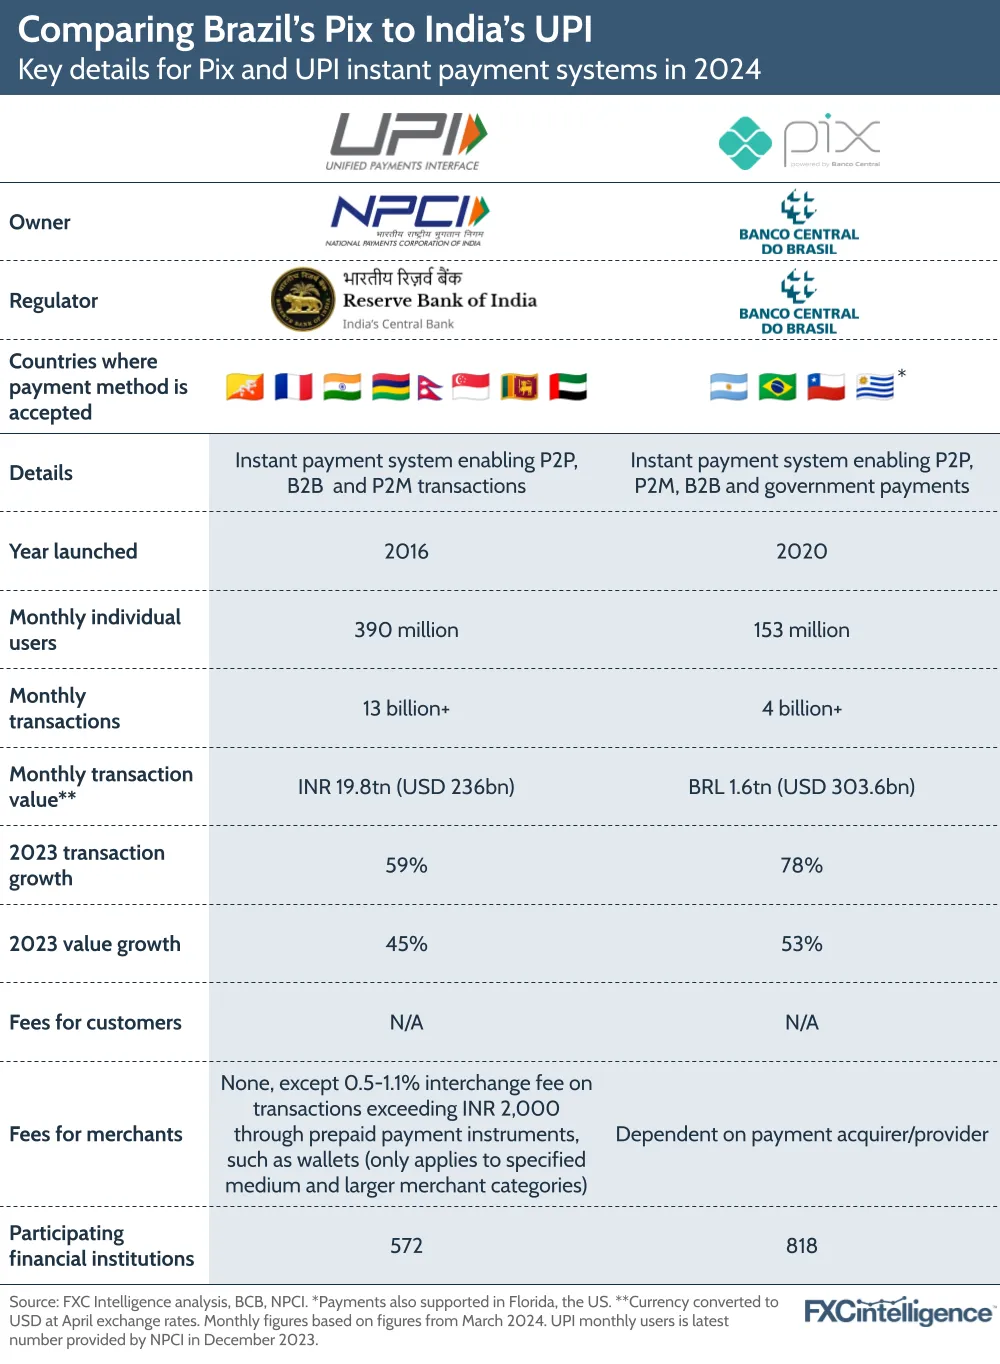 Comparing Brazil's Pix to India's UPI, Key details for Pix and UPI instant payment systems in 2024